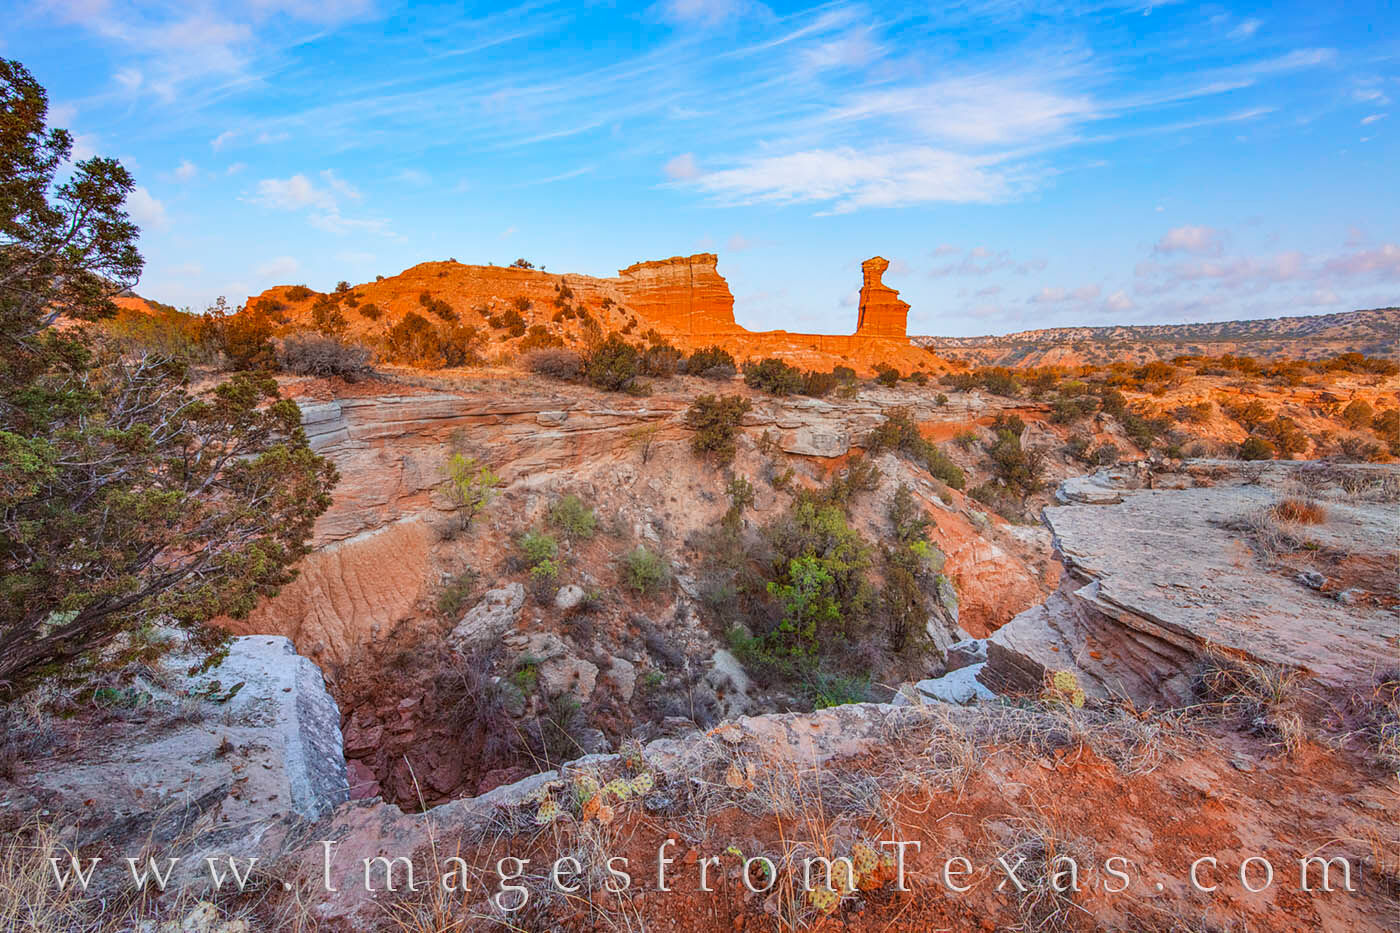 The Lighthouse in Palo Duro Canyon is an icon of the park and a hiking destination worth the 6 mile round trip.